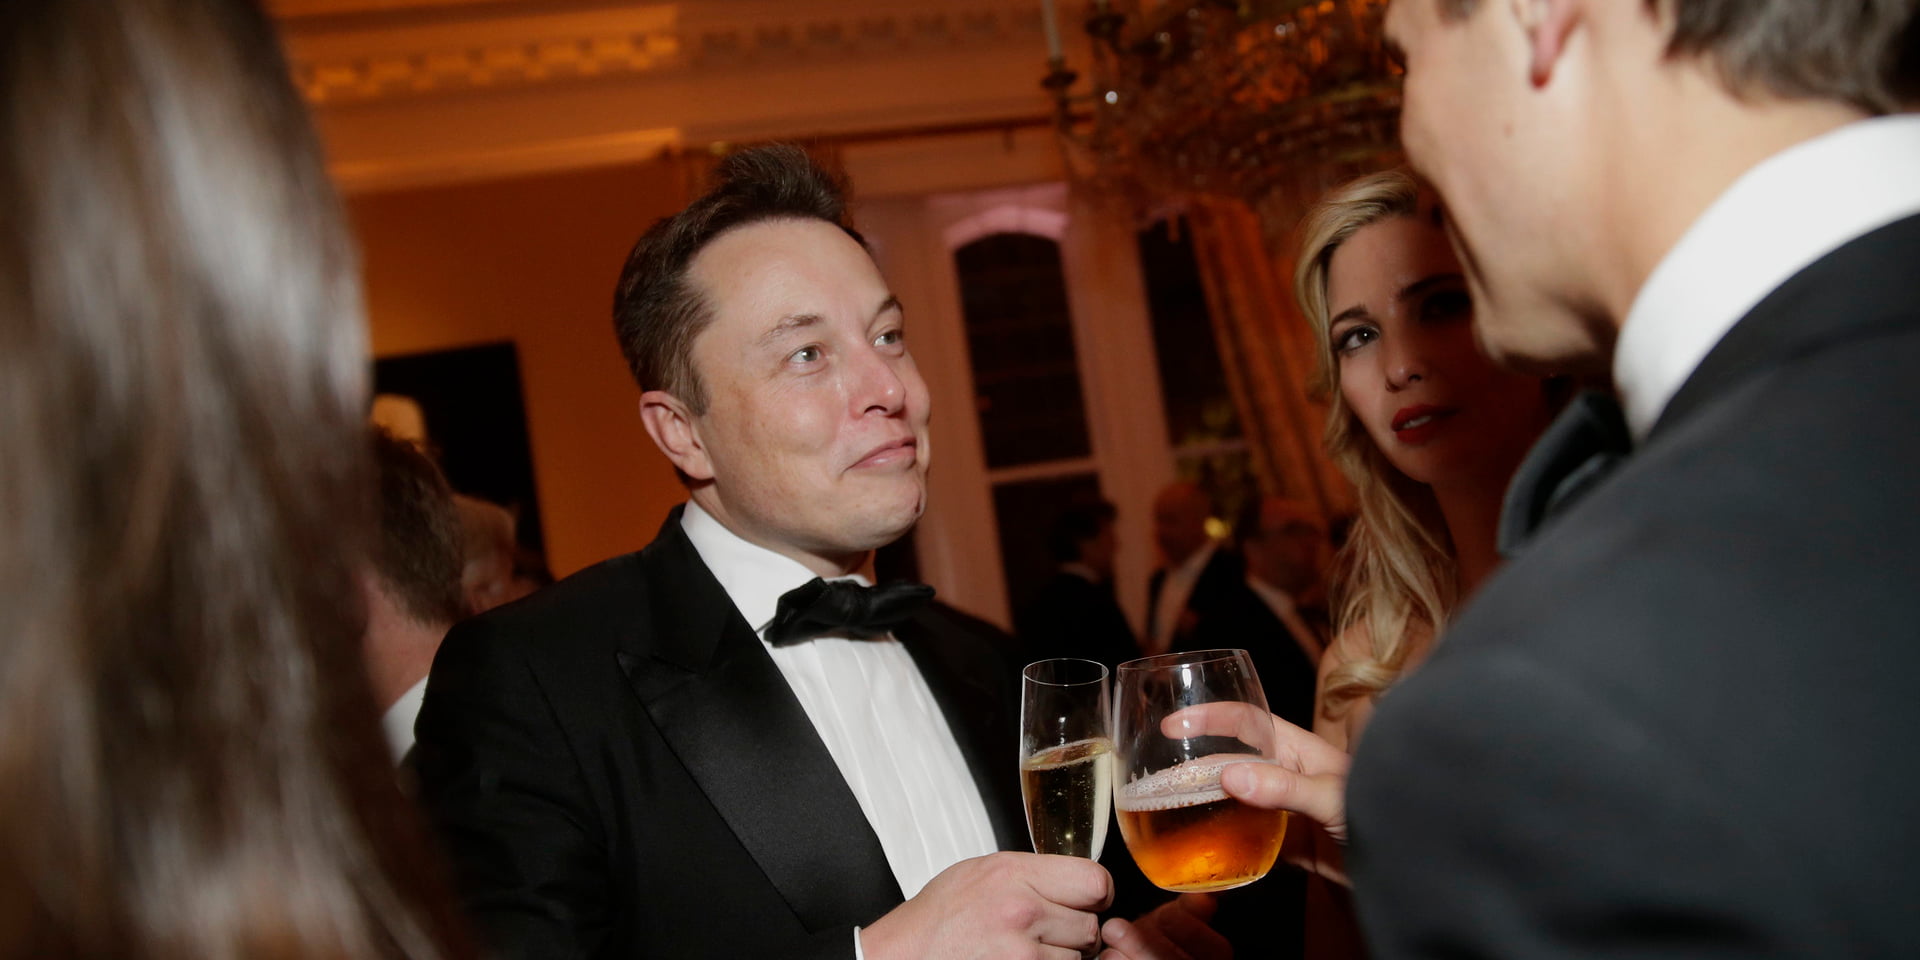 Elon Musk at a party